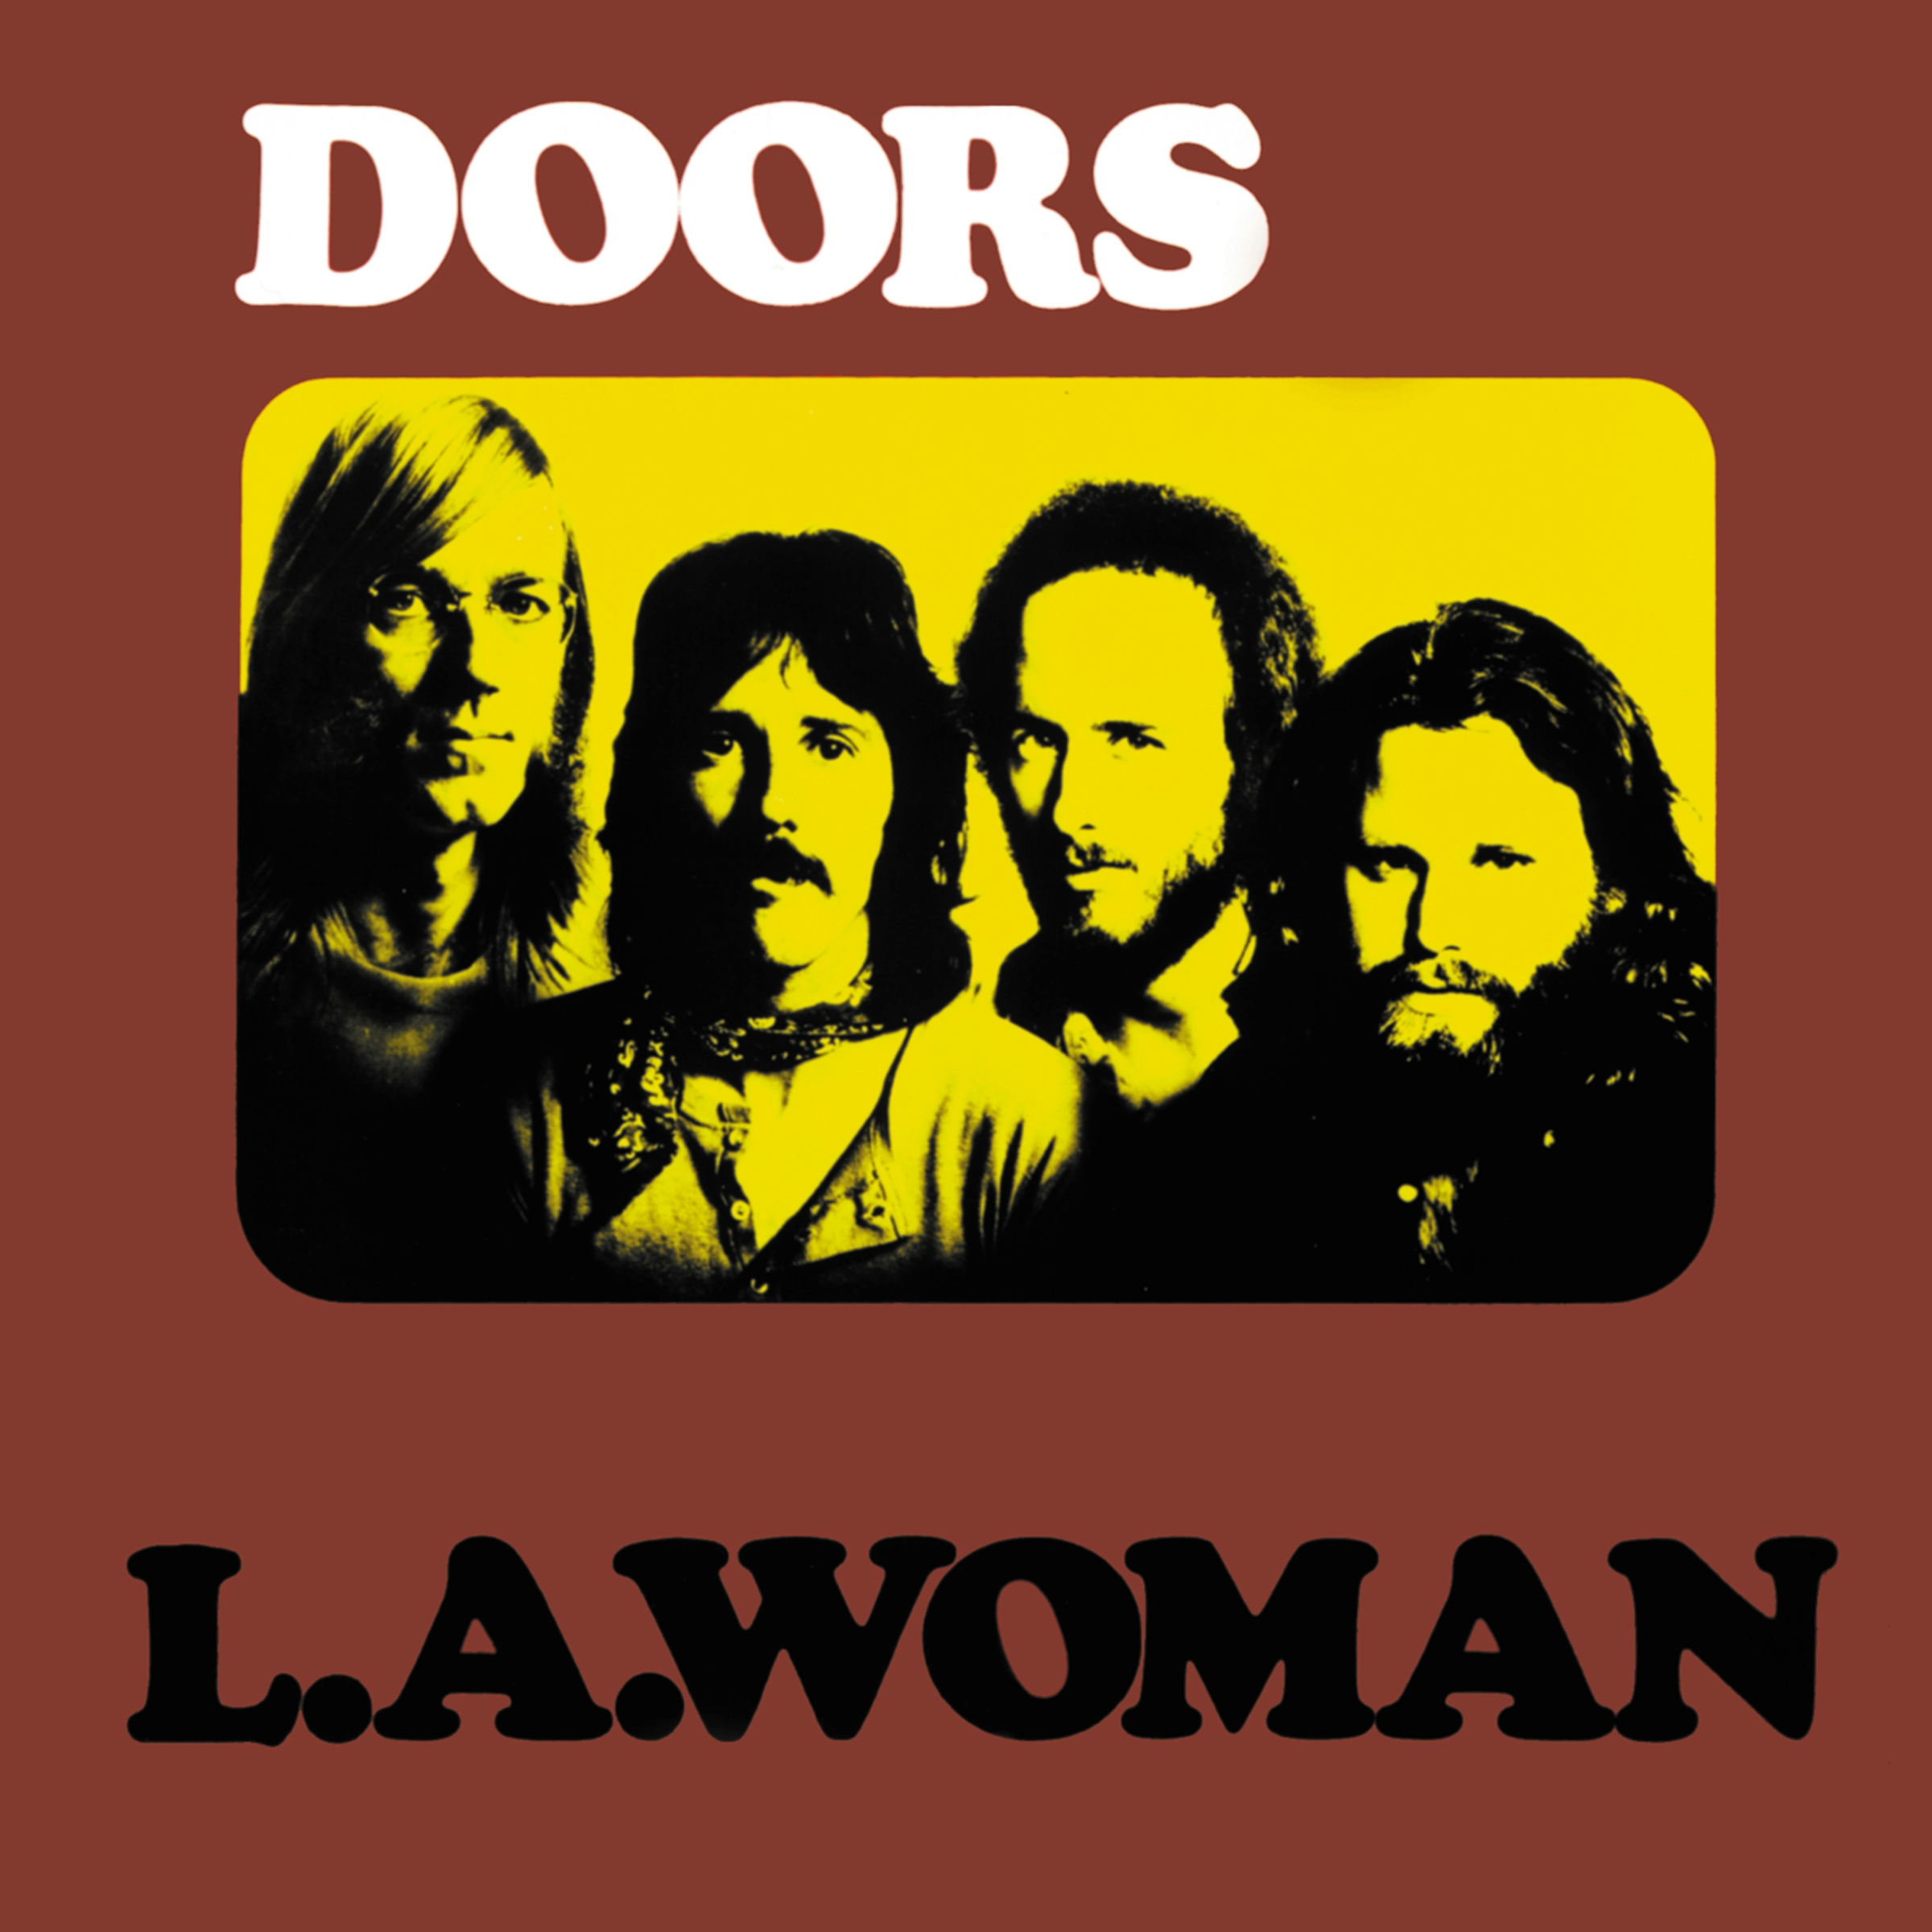 Album artwork for Album artwork for L.A. Woman by The Doors by L.A. Woman - The Doors